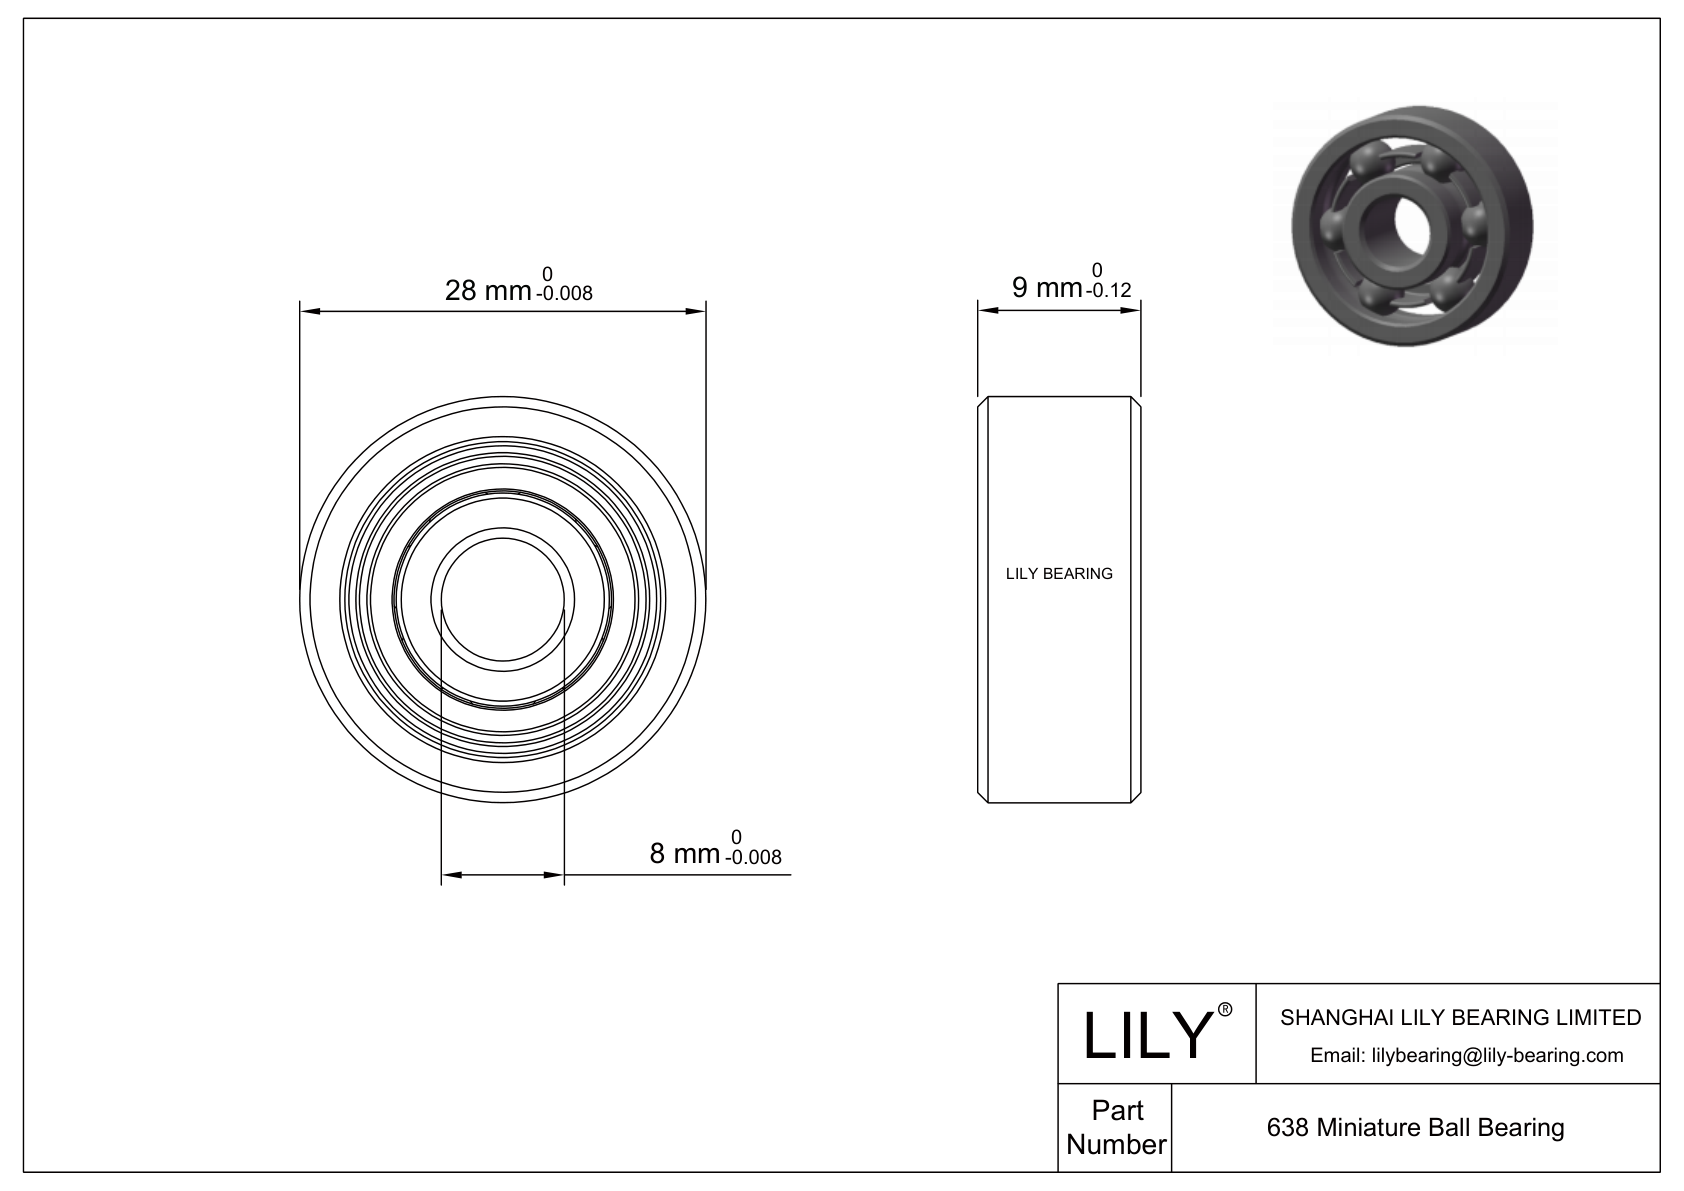 LILY-PU63850-20C1L10M8 Polyurethane Coated Bearing With Screw cad drawing